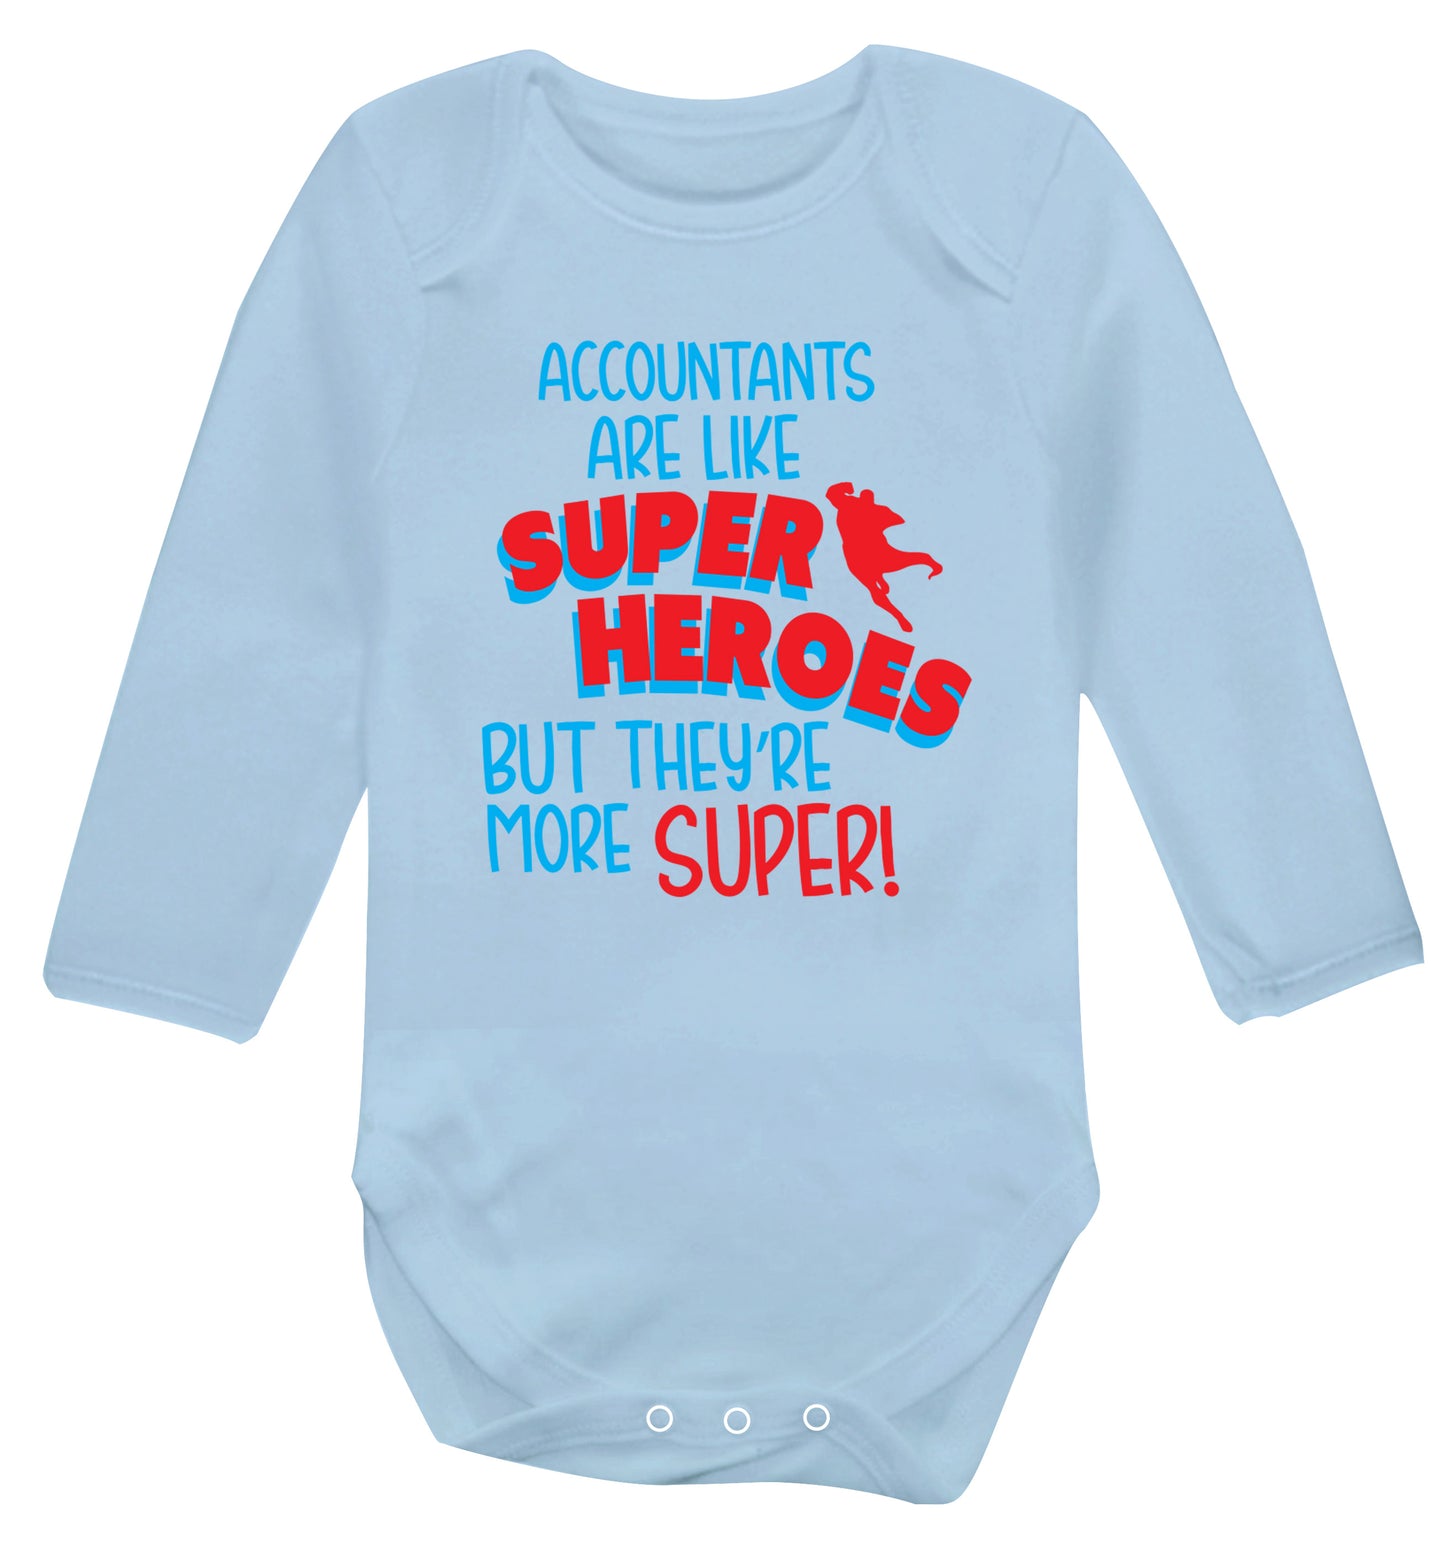 Accountants are like superheroes but they're more super Baby Vest long sleeved pale blue 6-12 months